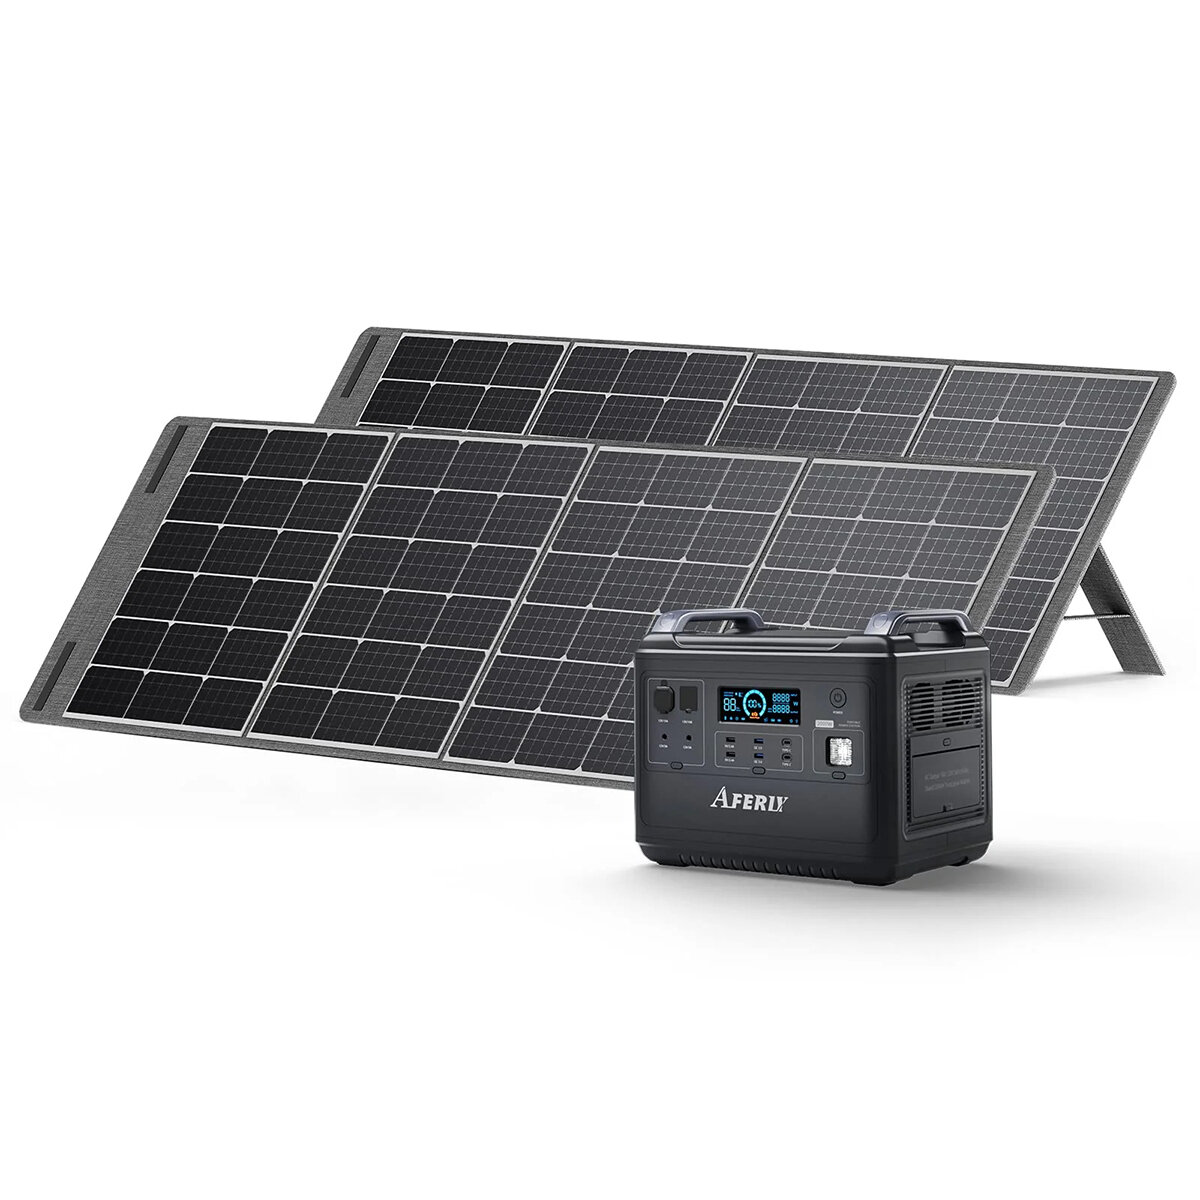 [EU Direct] Aferiy 2000W Portable Power Station Set with 2* 200W Solar Panel, 1997Wh/624000mAh LiFePO4 Storage Battery, UPS Uninterruptible Device Power Supply For Energy Saving Camping Outdoors EU Plug